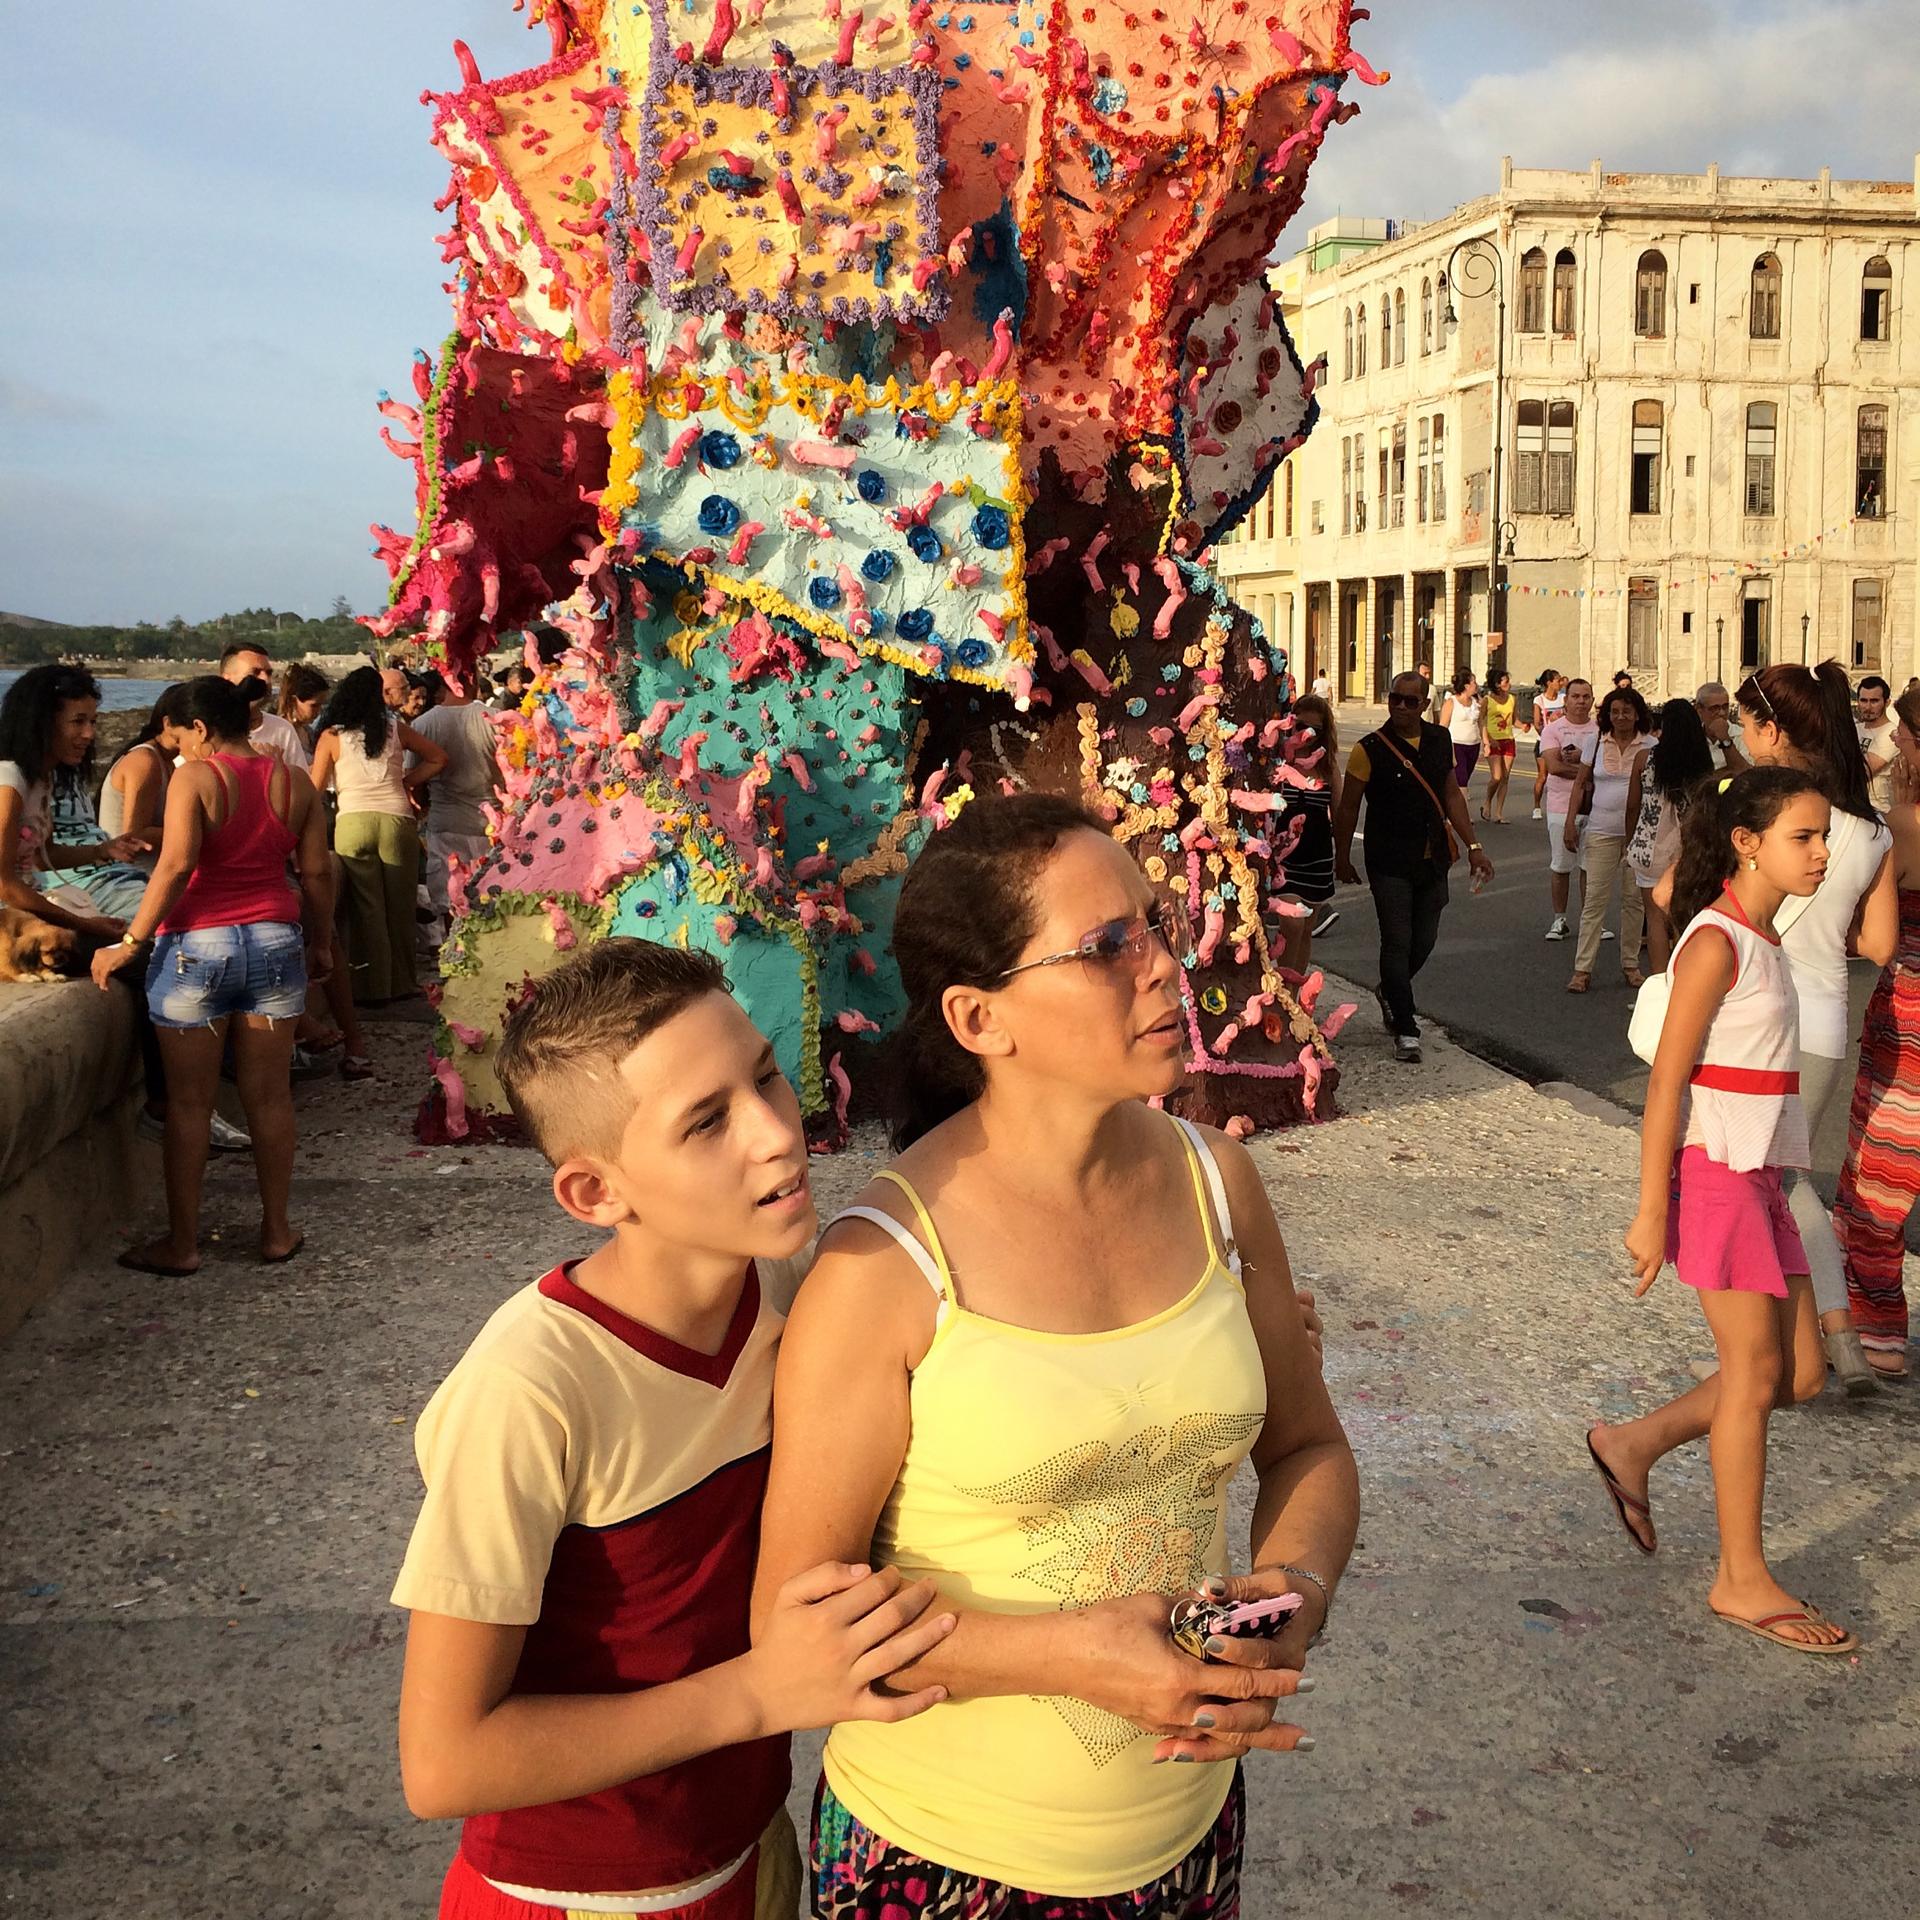 A mom and her son look at art installations along Havana's famous sea-facing esplanade, the Malecón. The entire collection of art here is called 